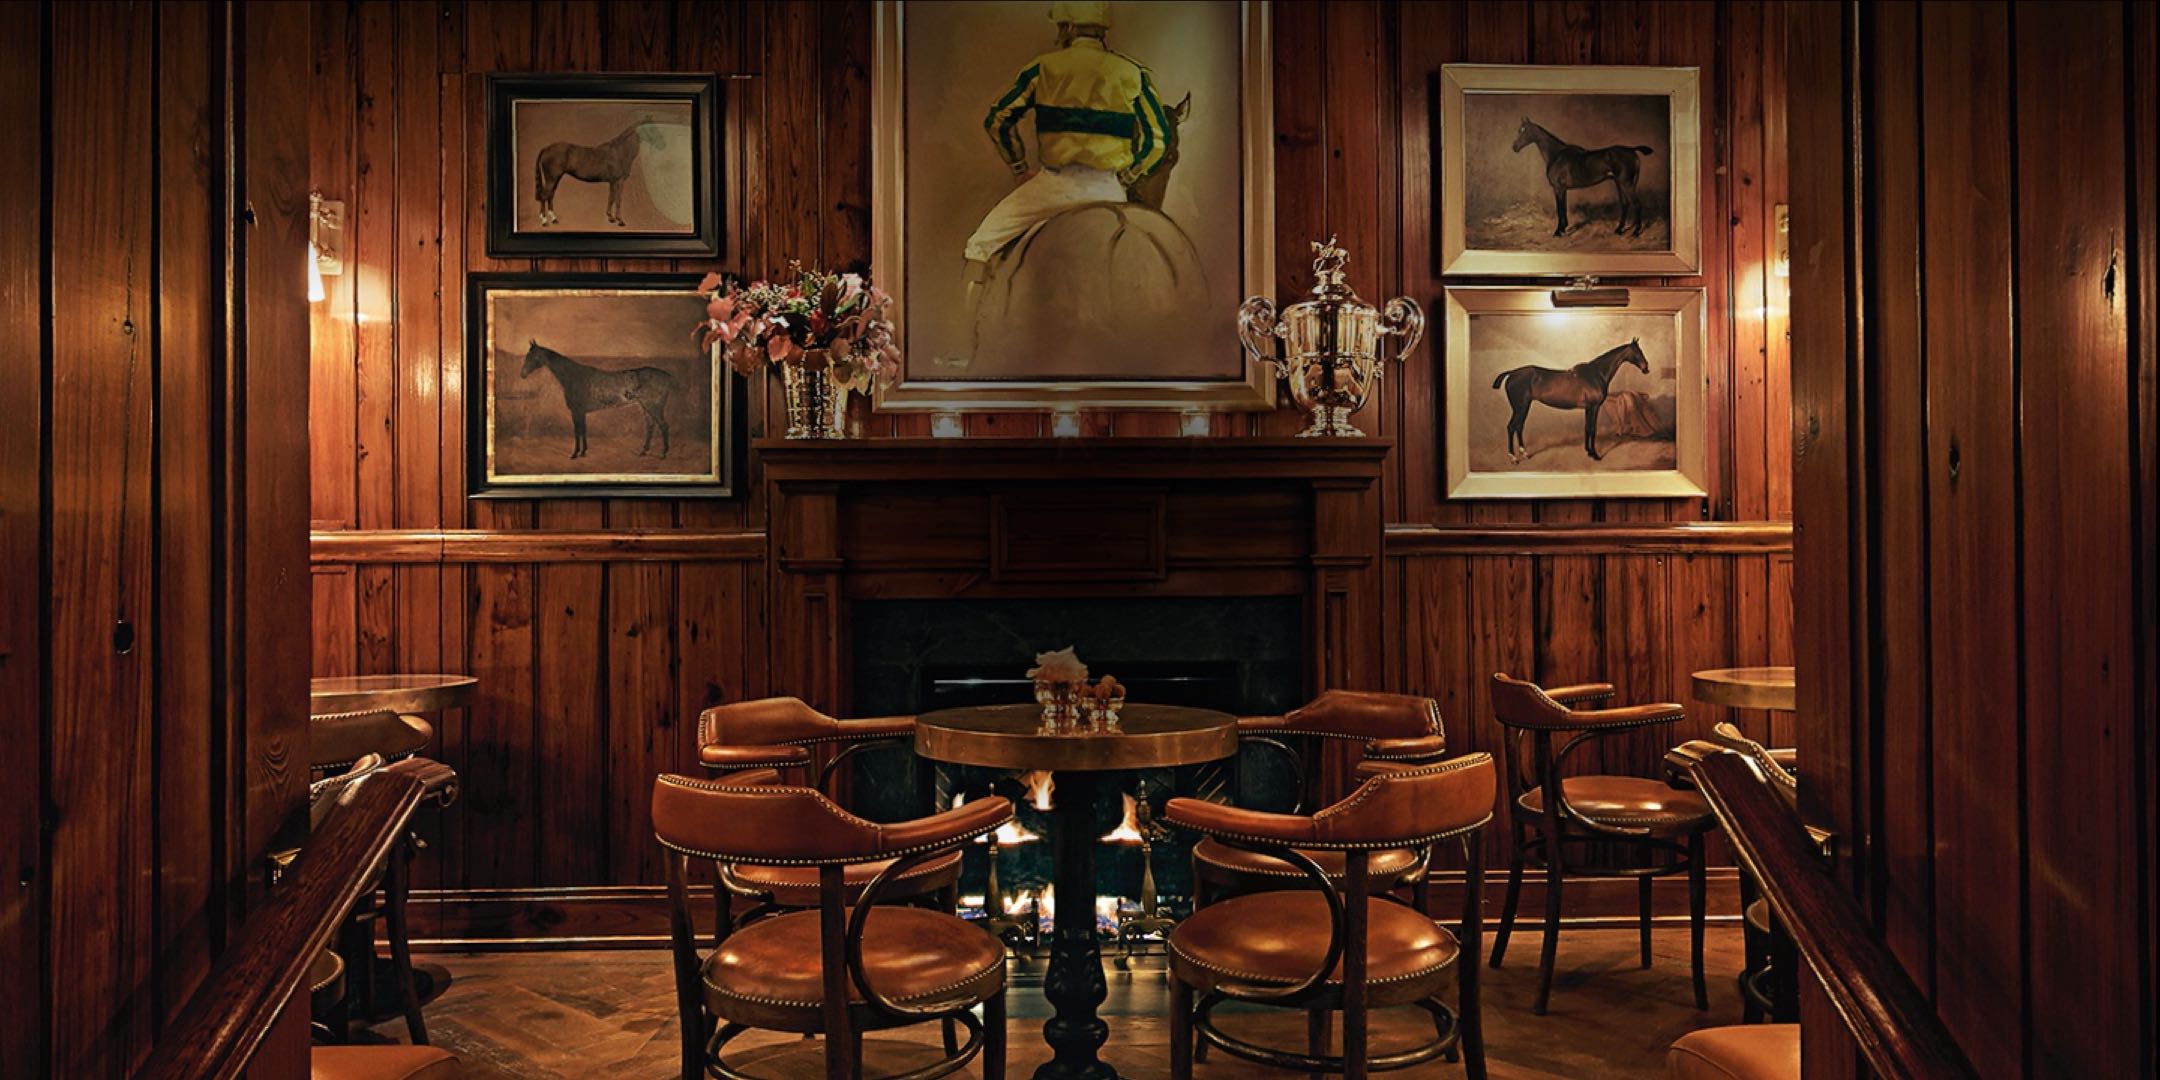 Video of the interior of The Polo Bar